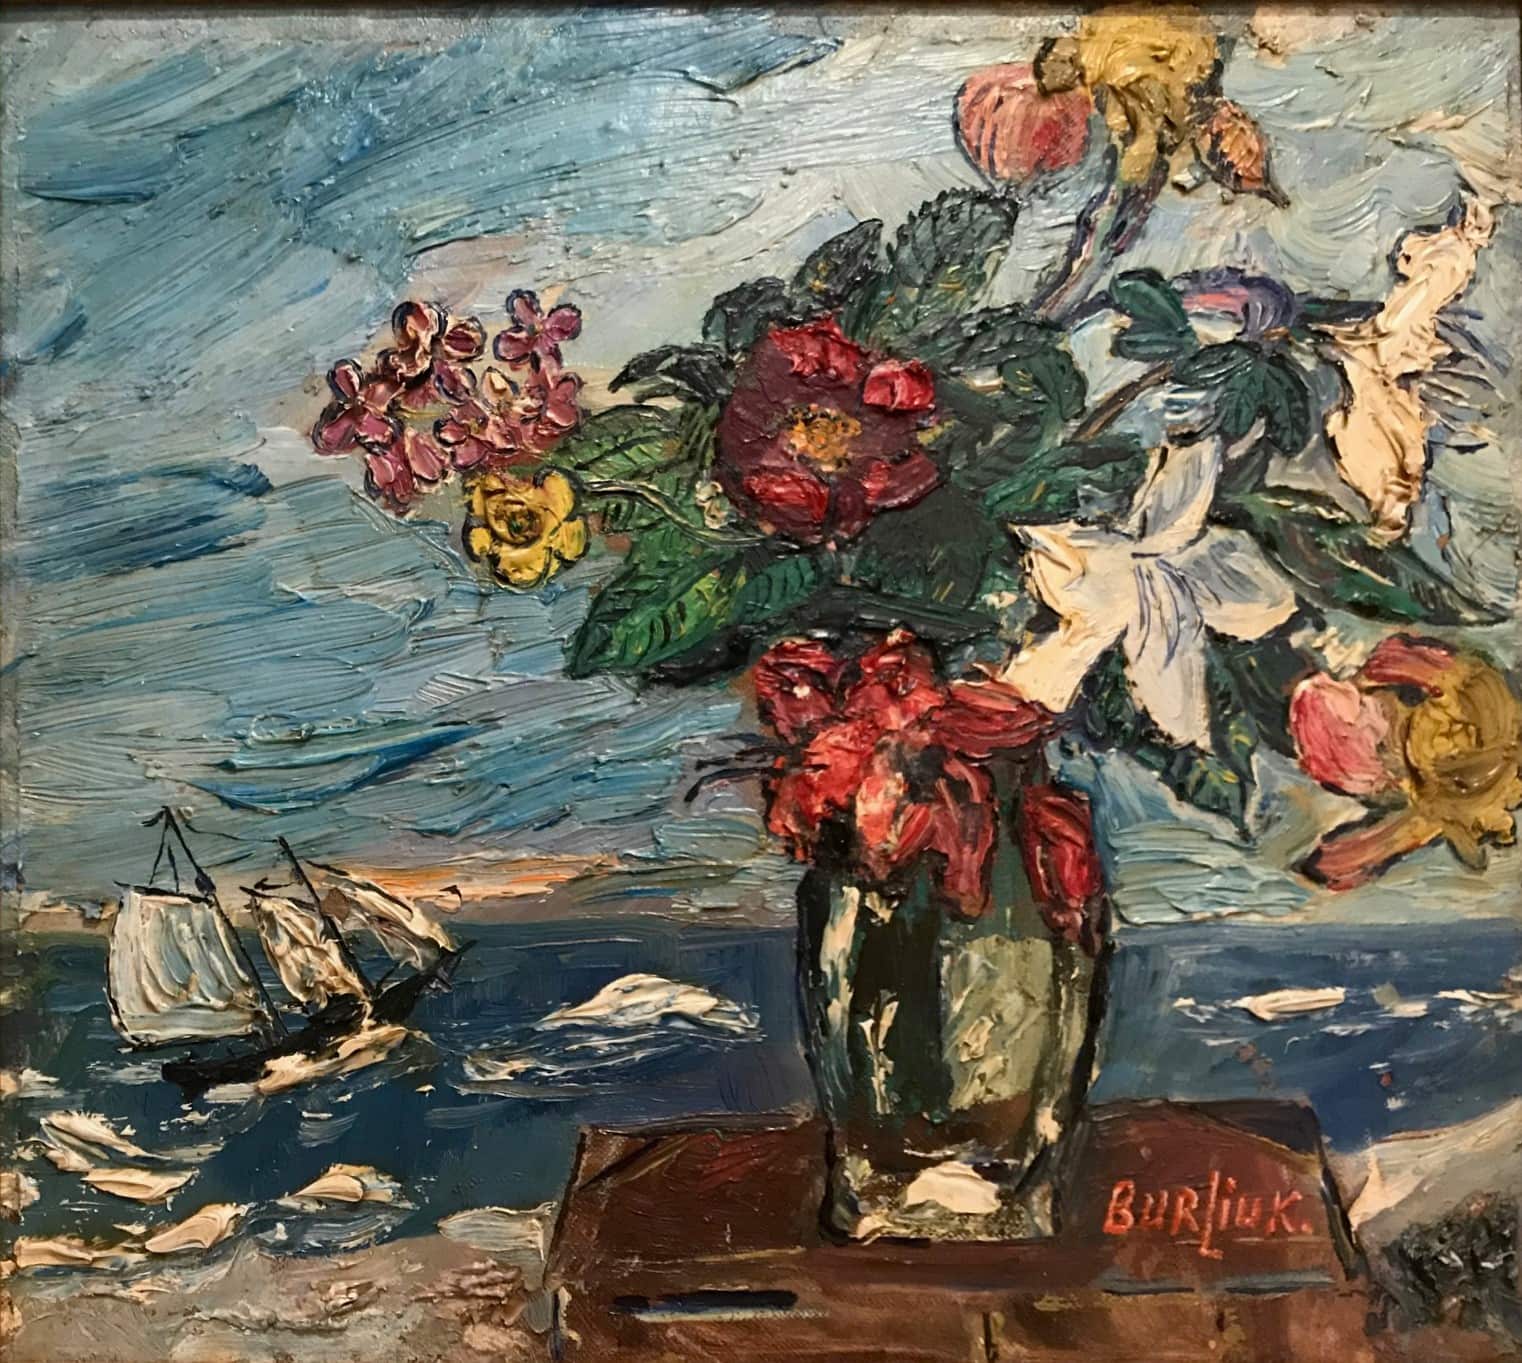 Burliuk's Still Life with Ship and Flowers. Vase of flowers on a table, seaside, with sailing vessel. Thick, textured brushwork.